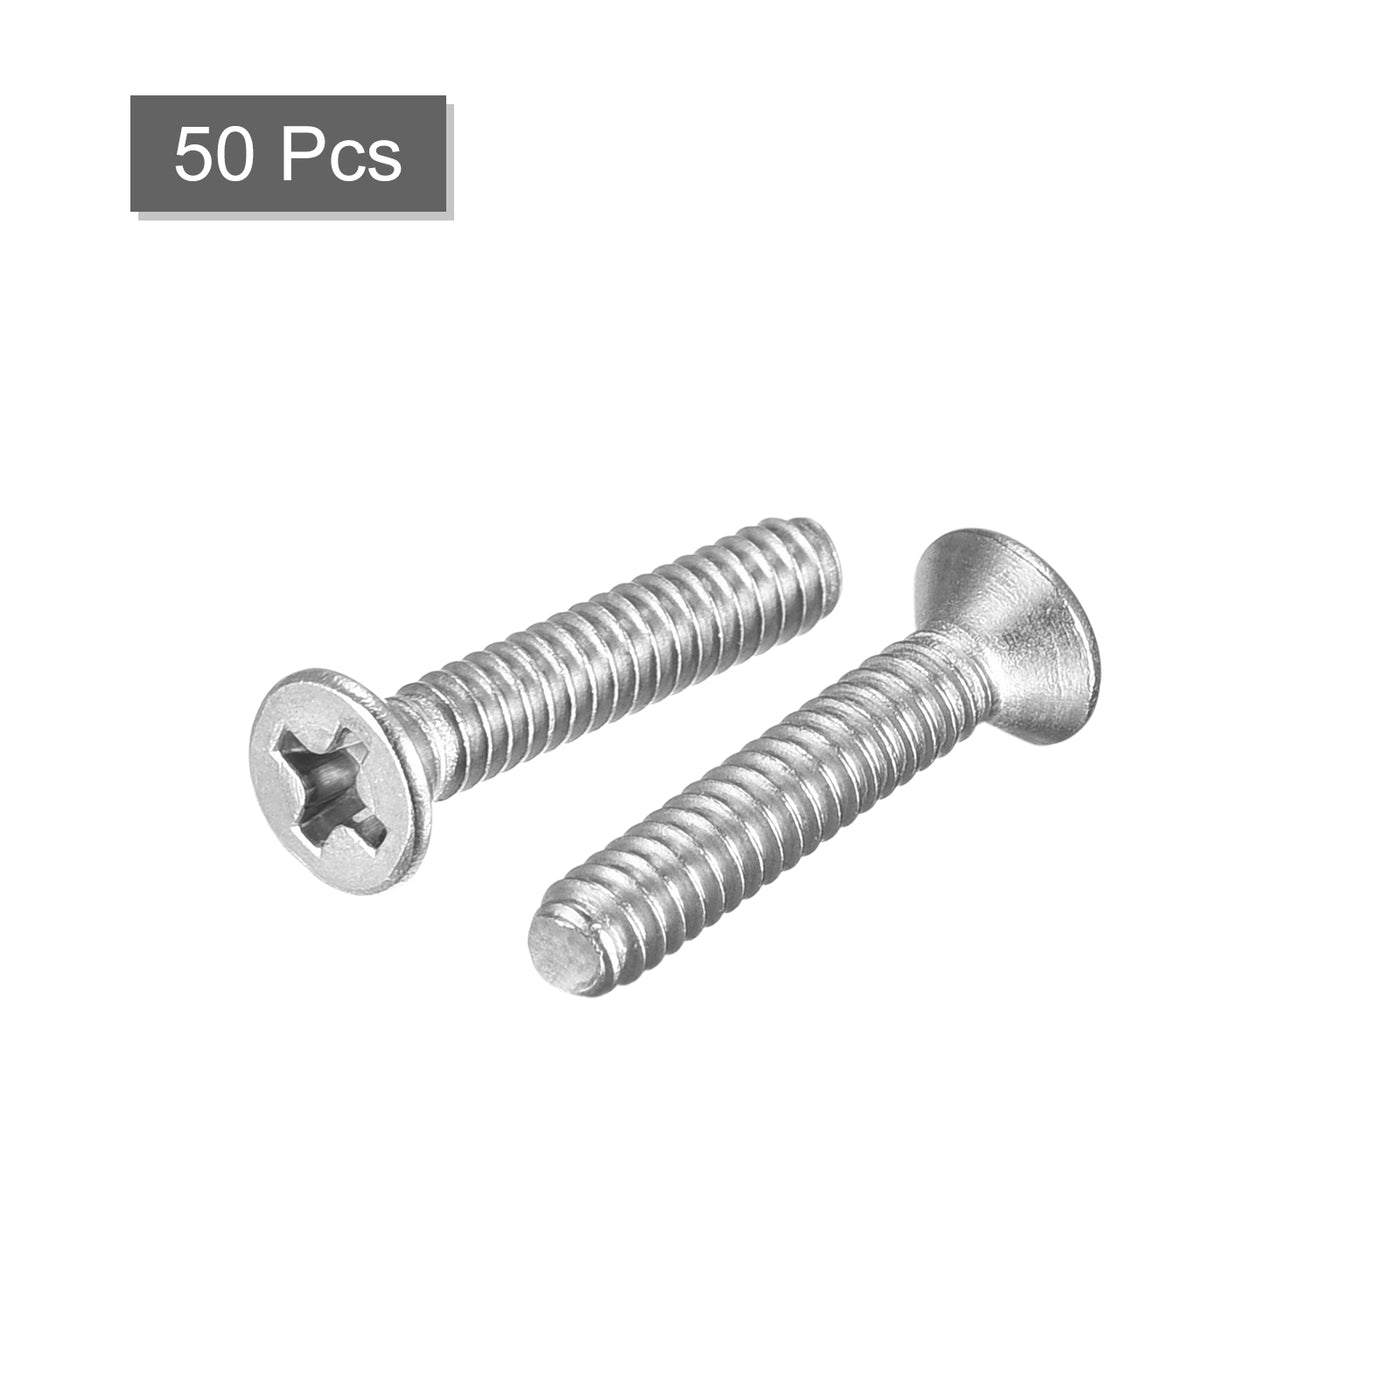 Uxcell Uxcell 8#-32x5/8" Flat Head Machine Screws Phillips 304 Stainless Steel Bolts 50pcs